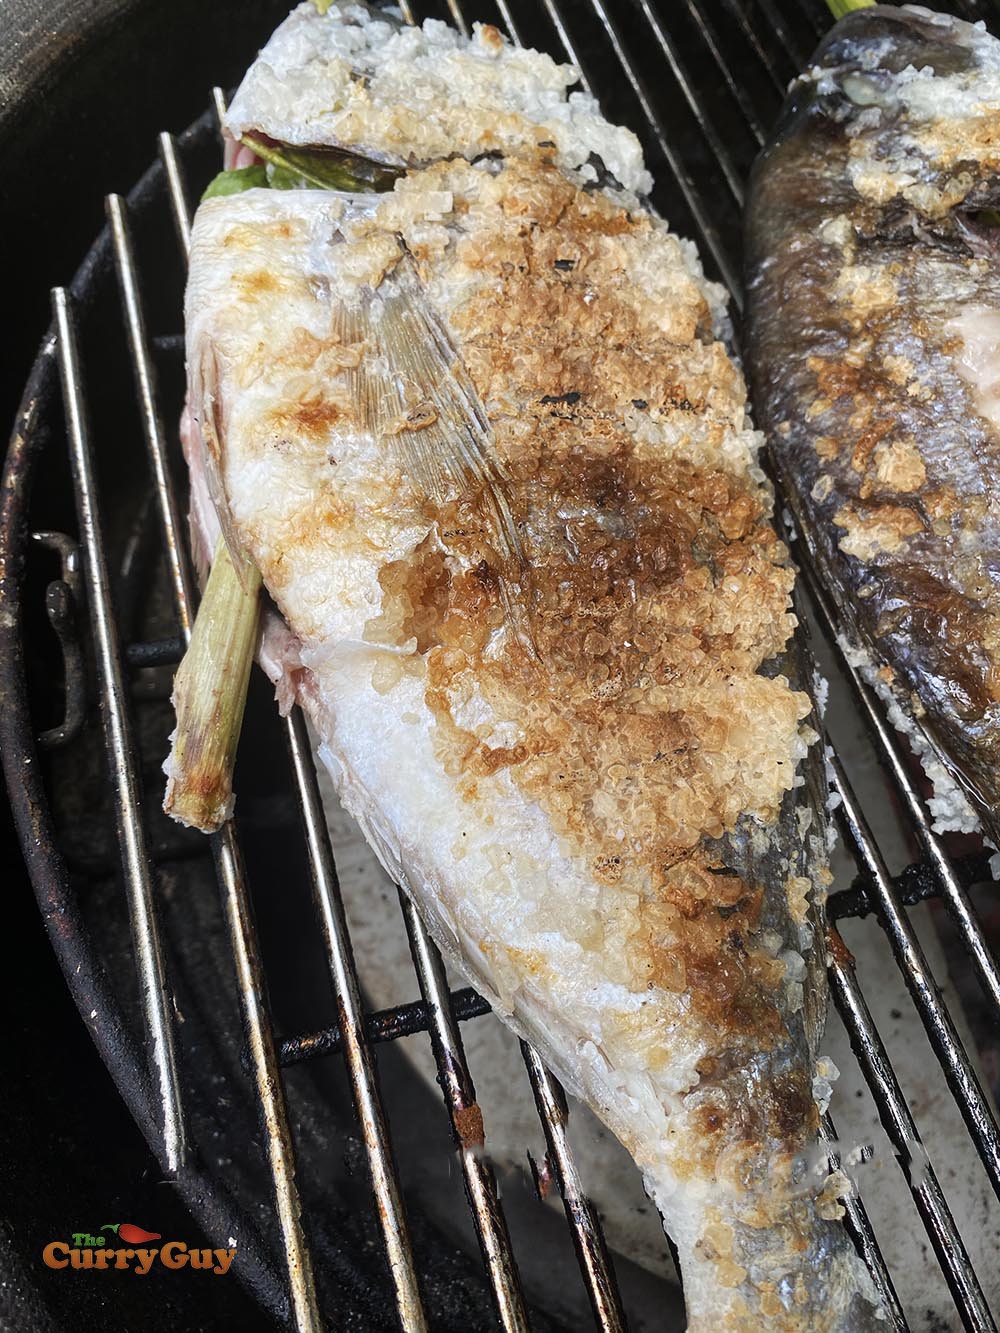 Fish cooking over a low heat on the barbecue.